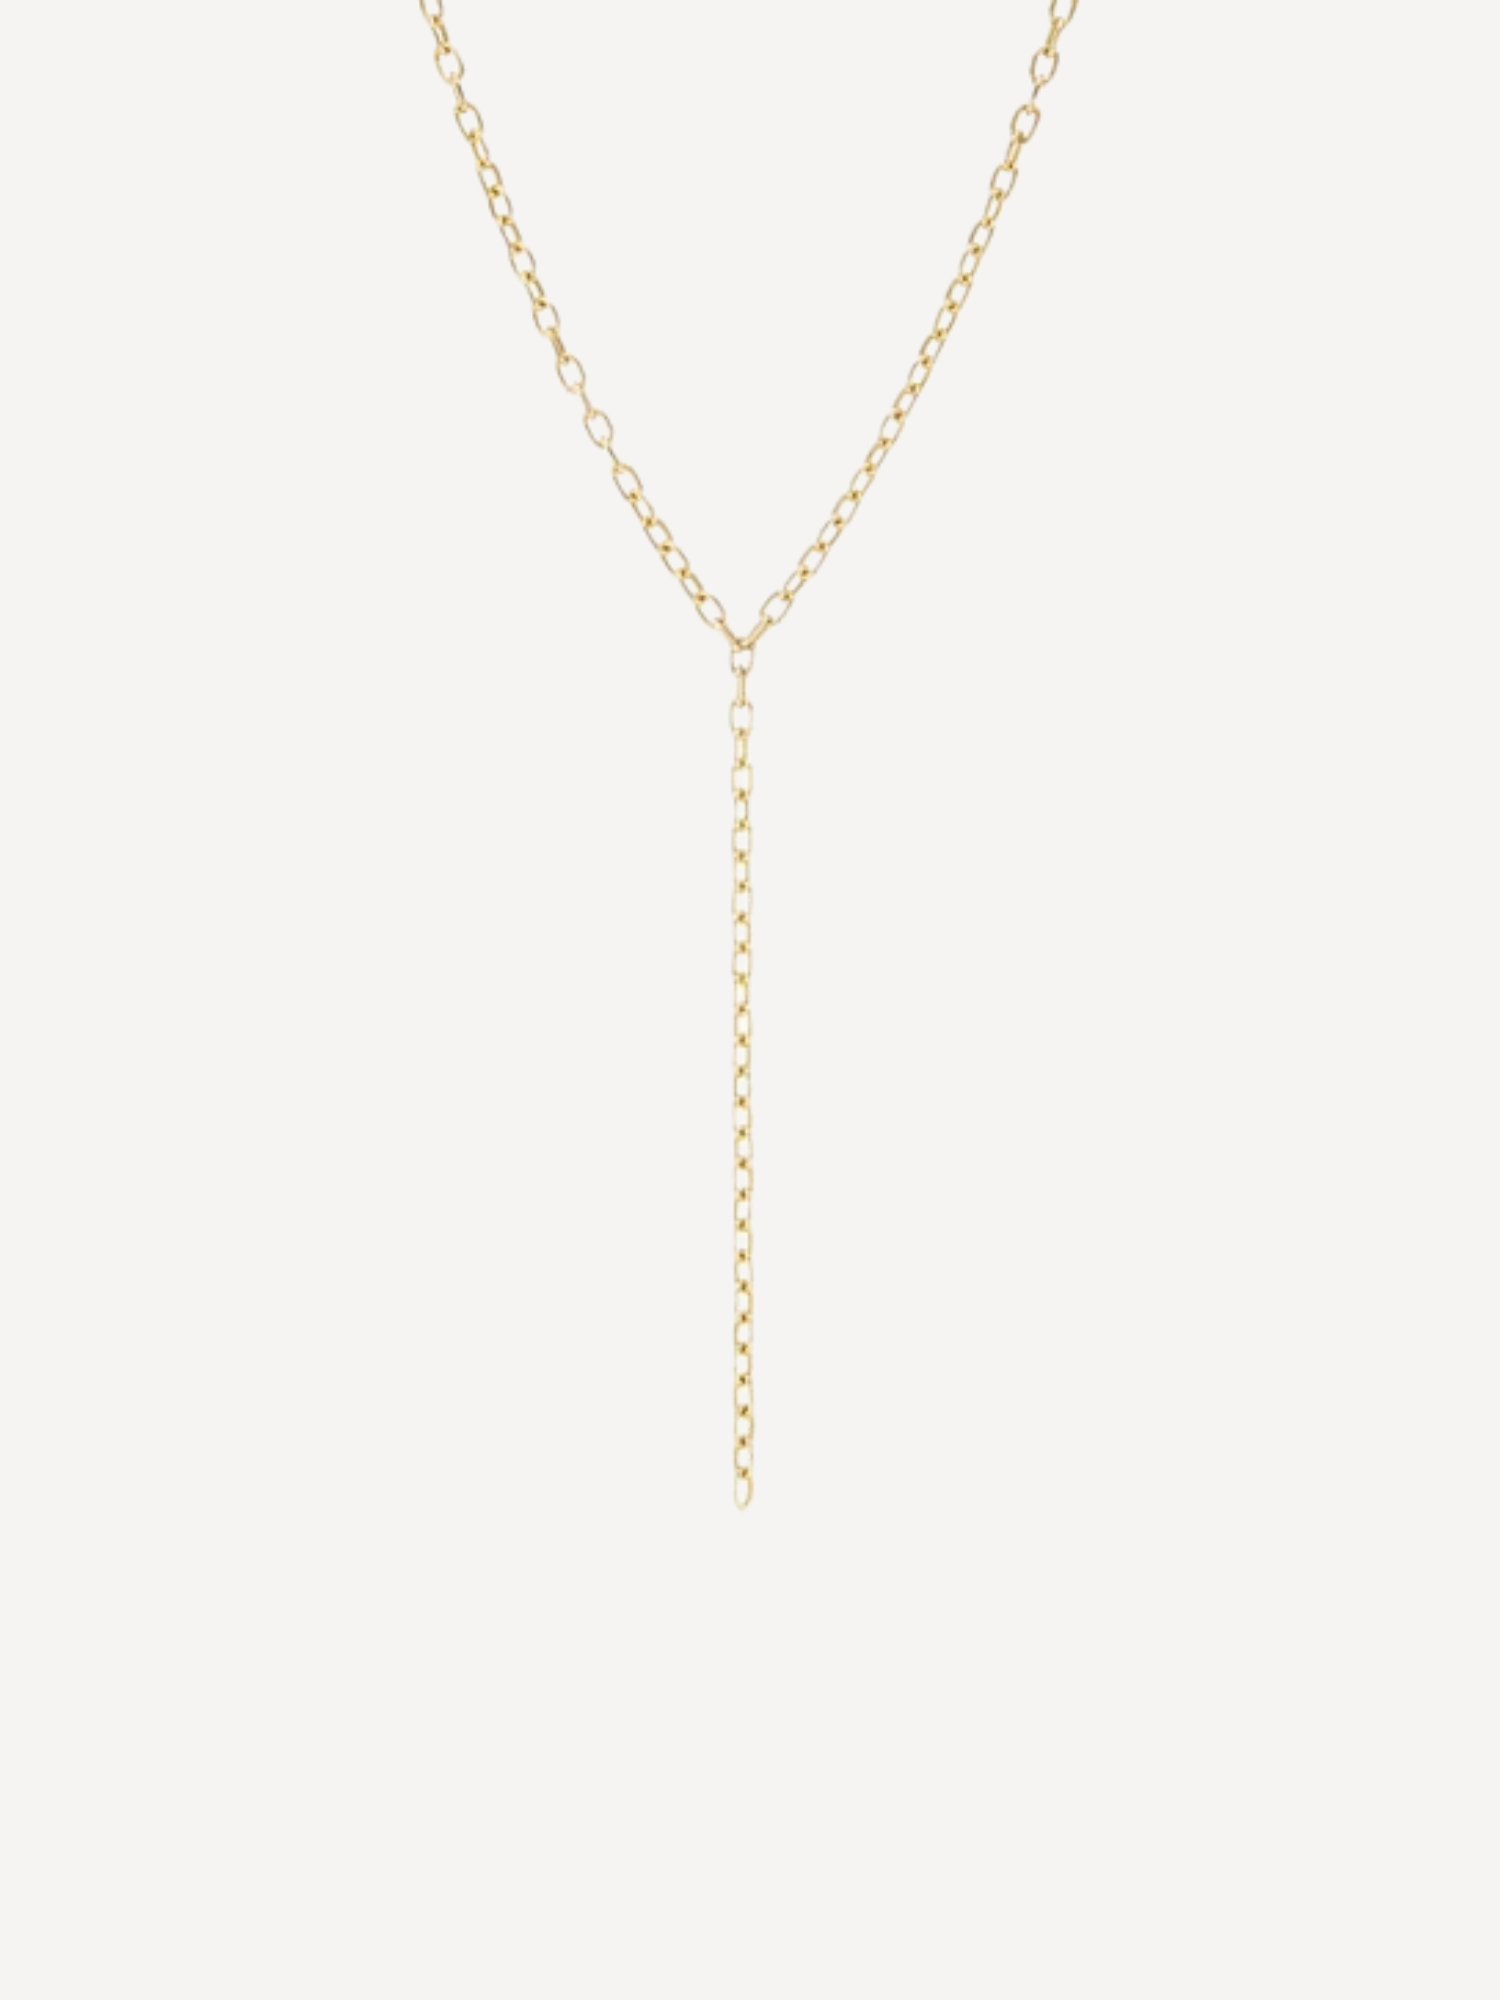 Elongated Chain Link Lariat